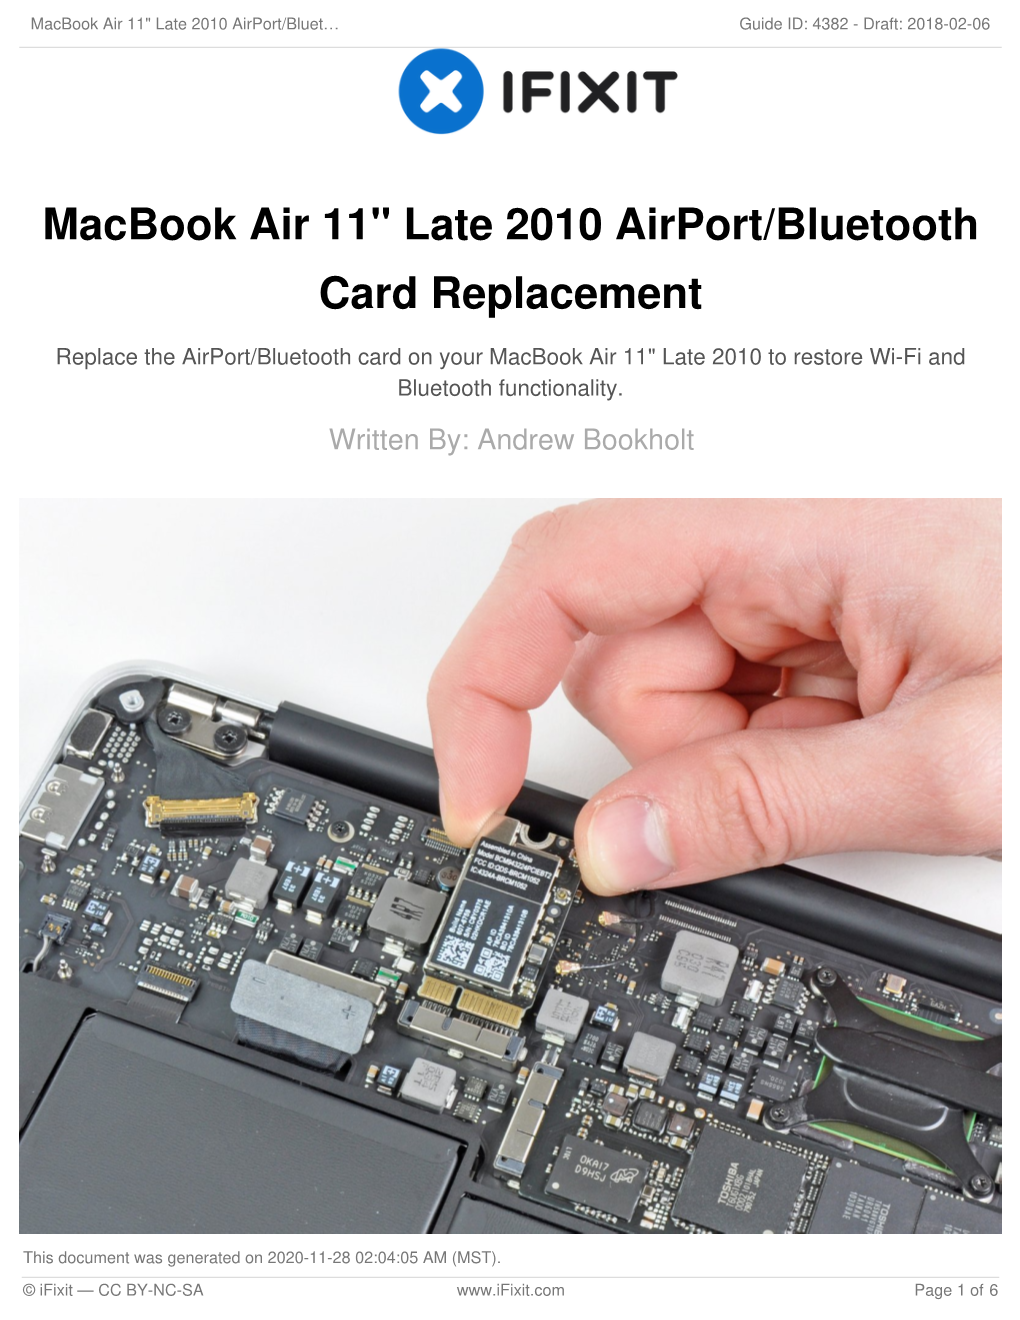 Macbook Air 11" Late 2010 Airport/Bluetooth Card Replacement